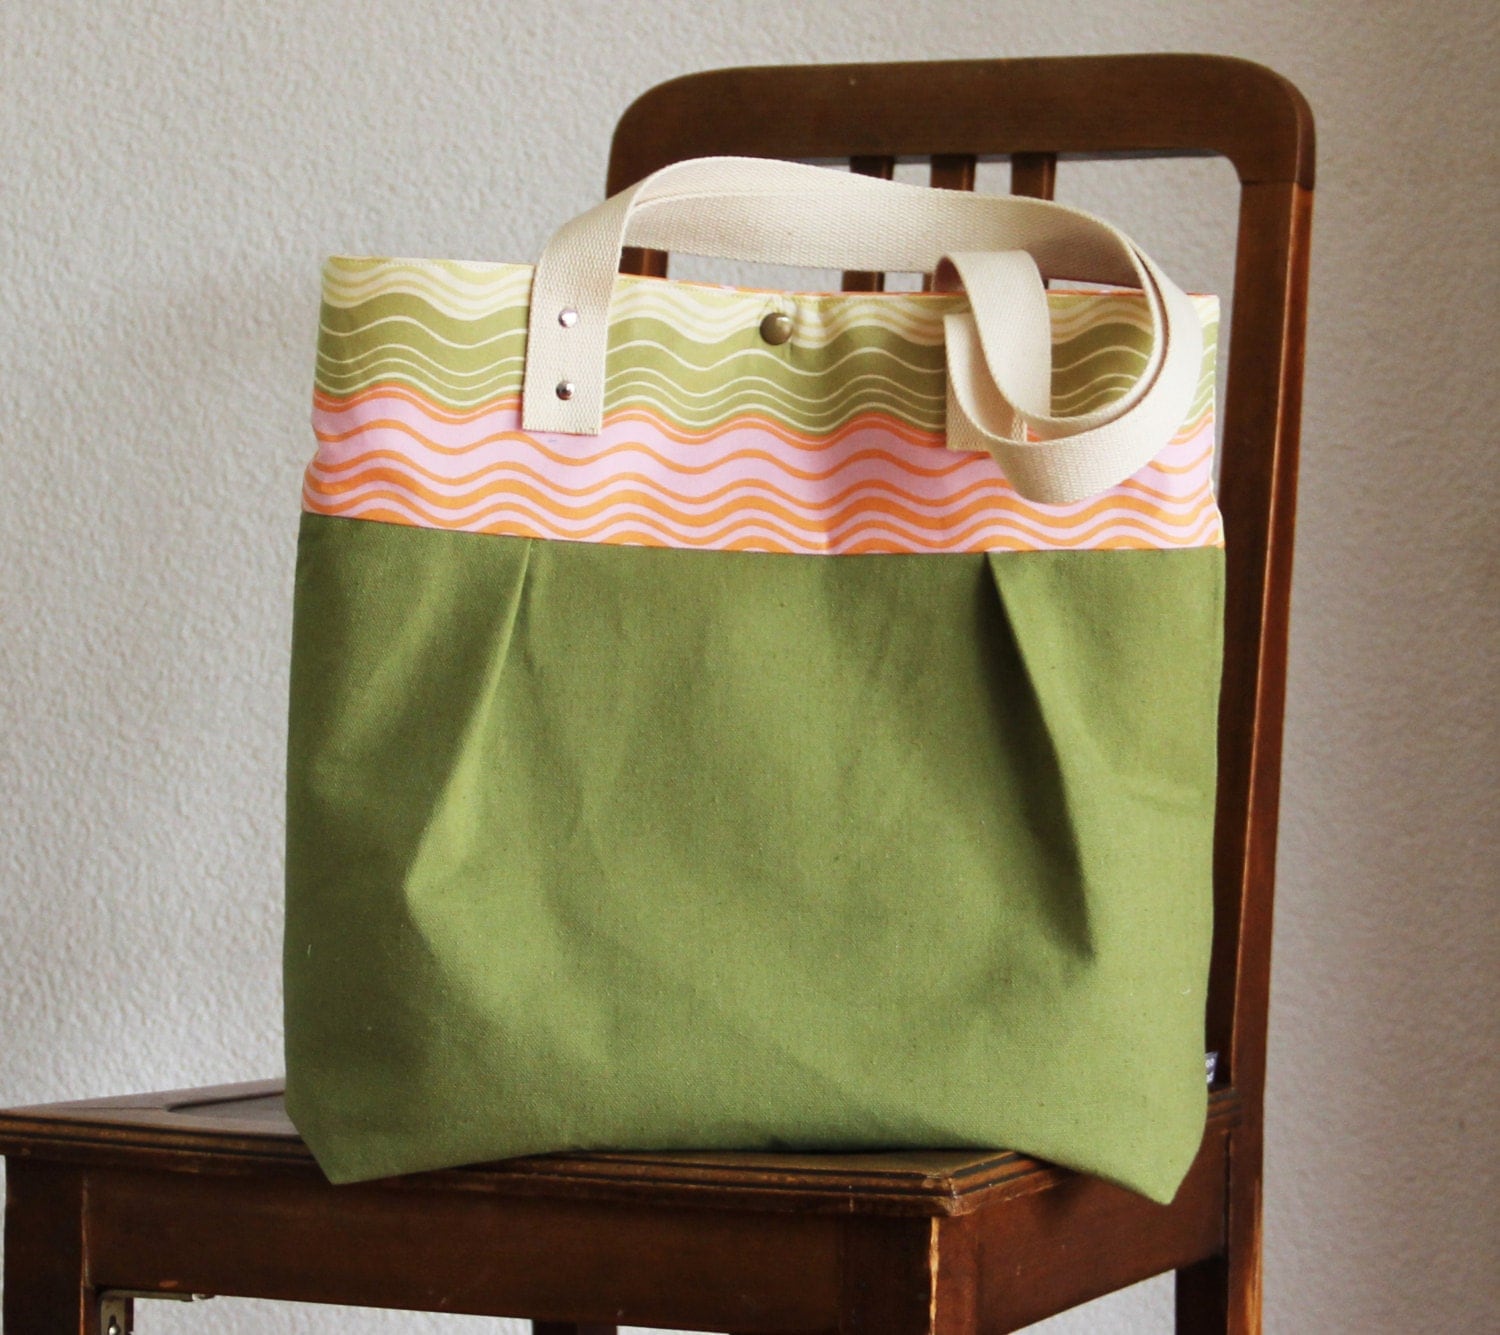 Green bag/tote canvas with cotton webbing strap by SweetPeaDoodad